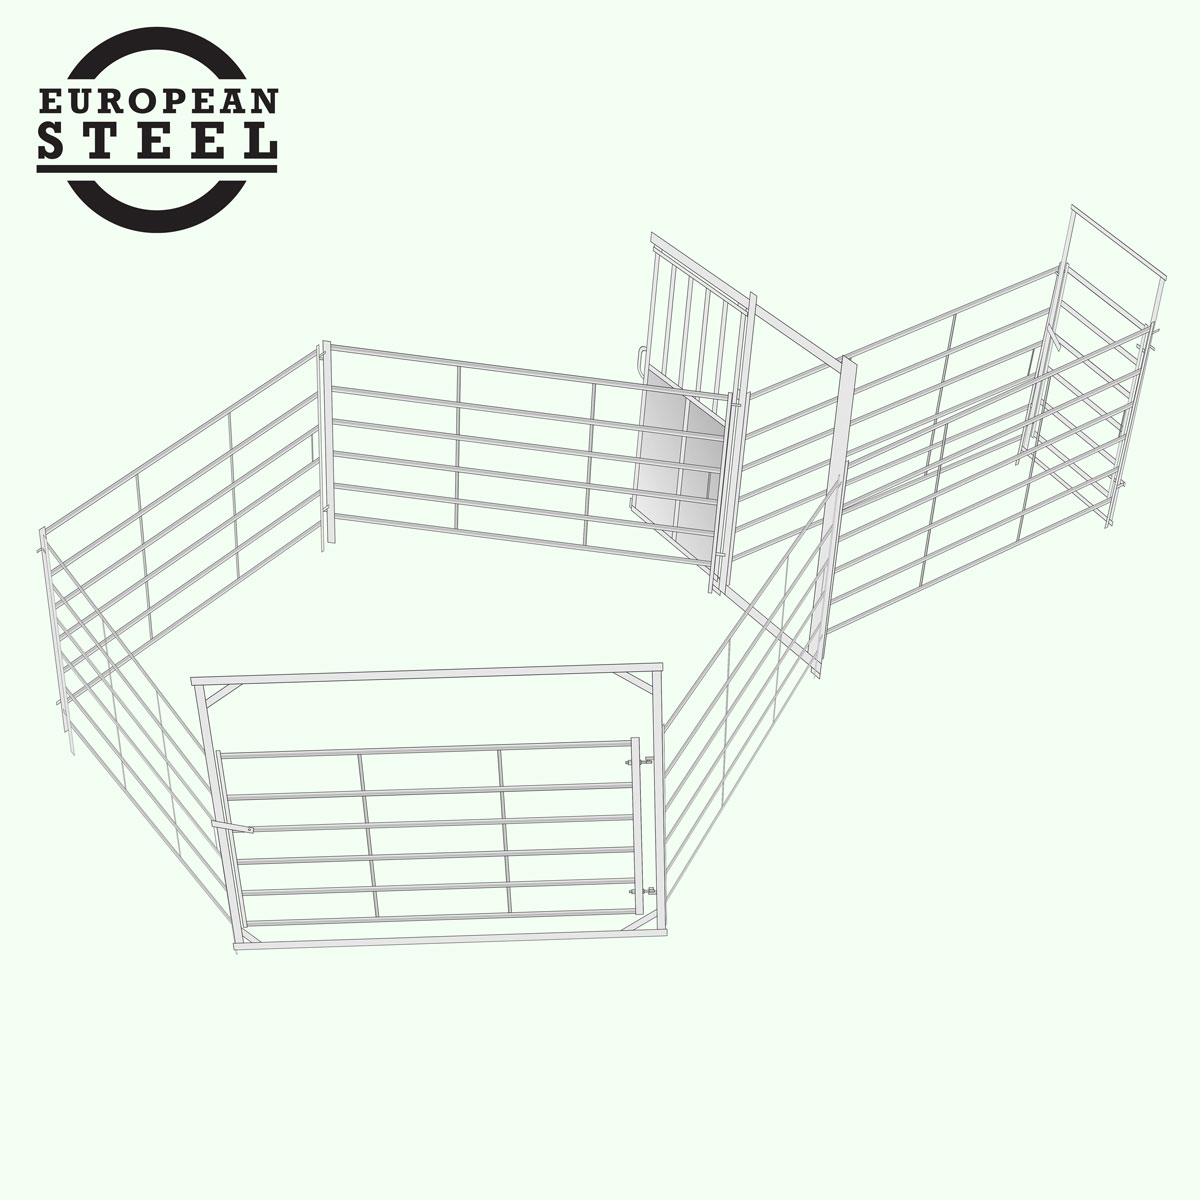 Cattle yards: Easy handler for up to 10 head